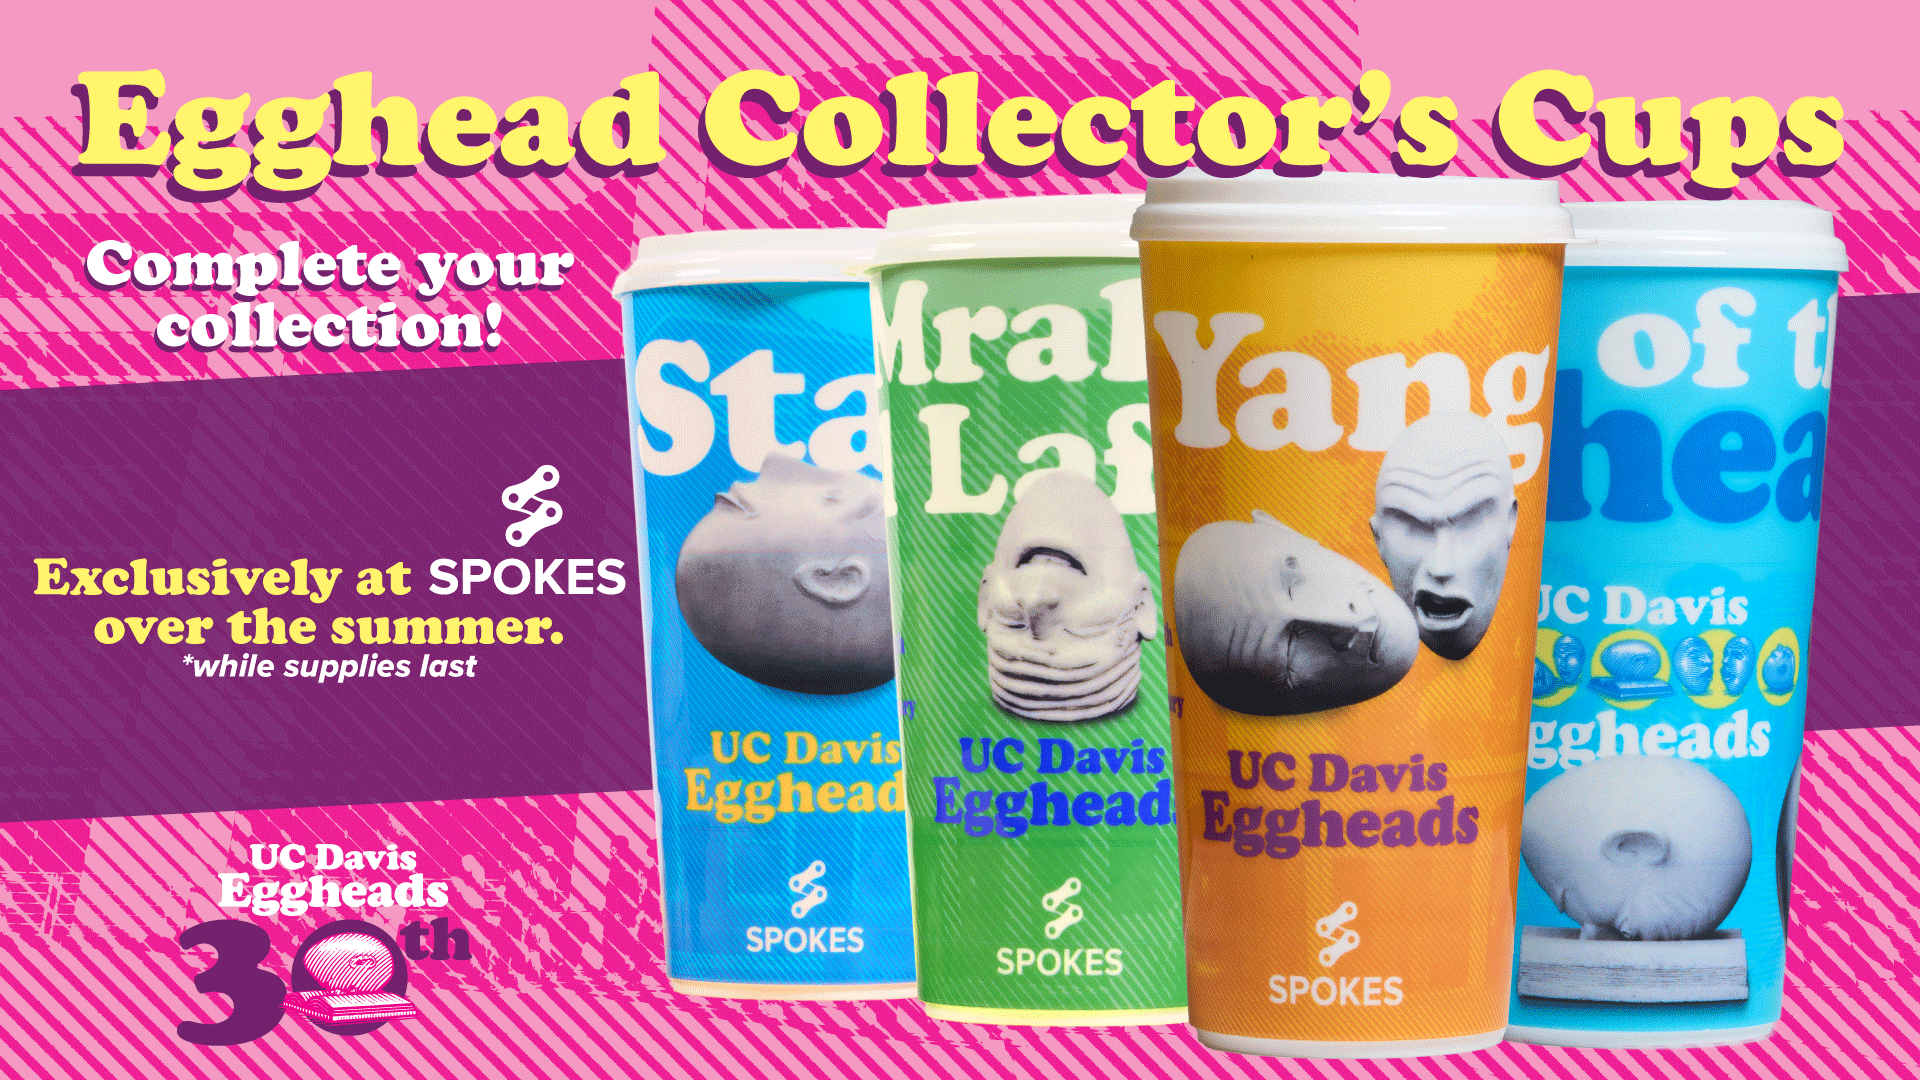 Egghead Collector's Cups - Complete your collection! Exclusively at Spokes over the summer, while supplies last.